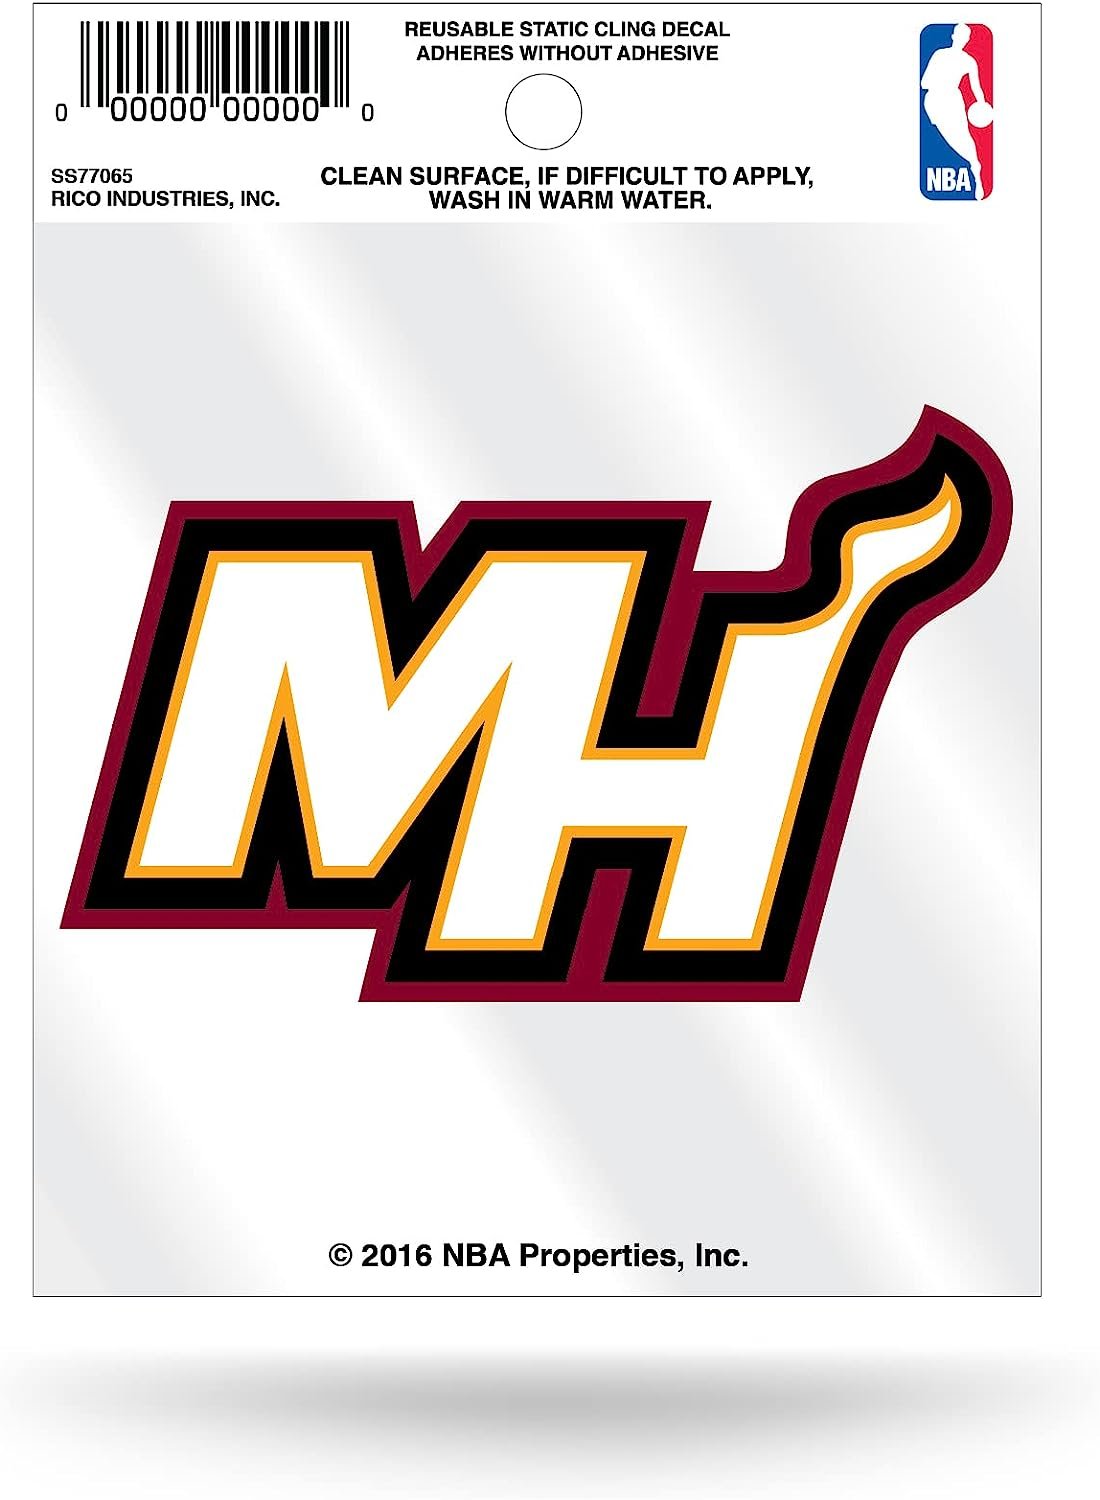 Miami Heat Static Cling Decal Sticker, 3.5 Inch, Clear Backing, Secondary Logo